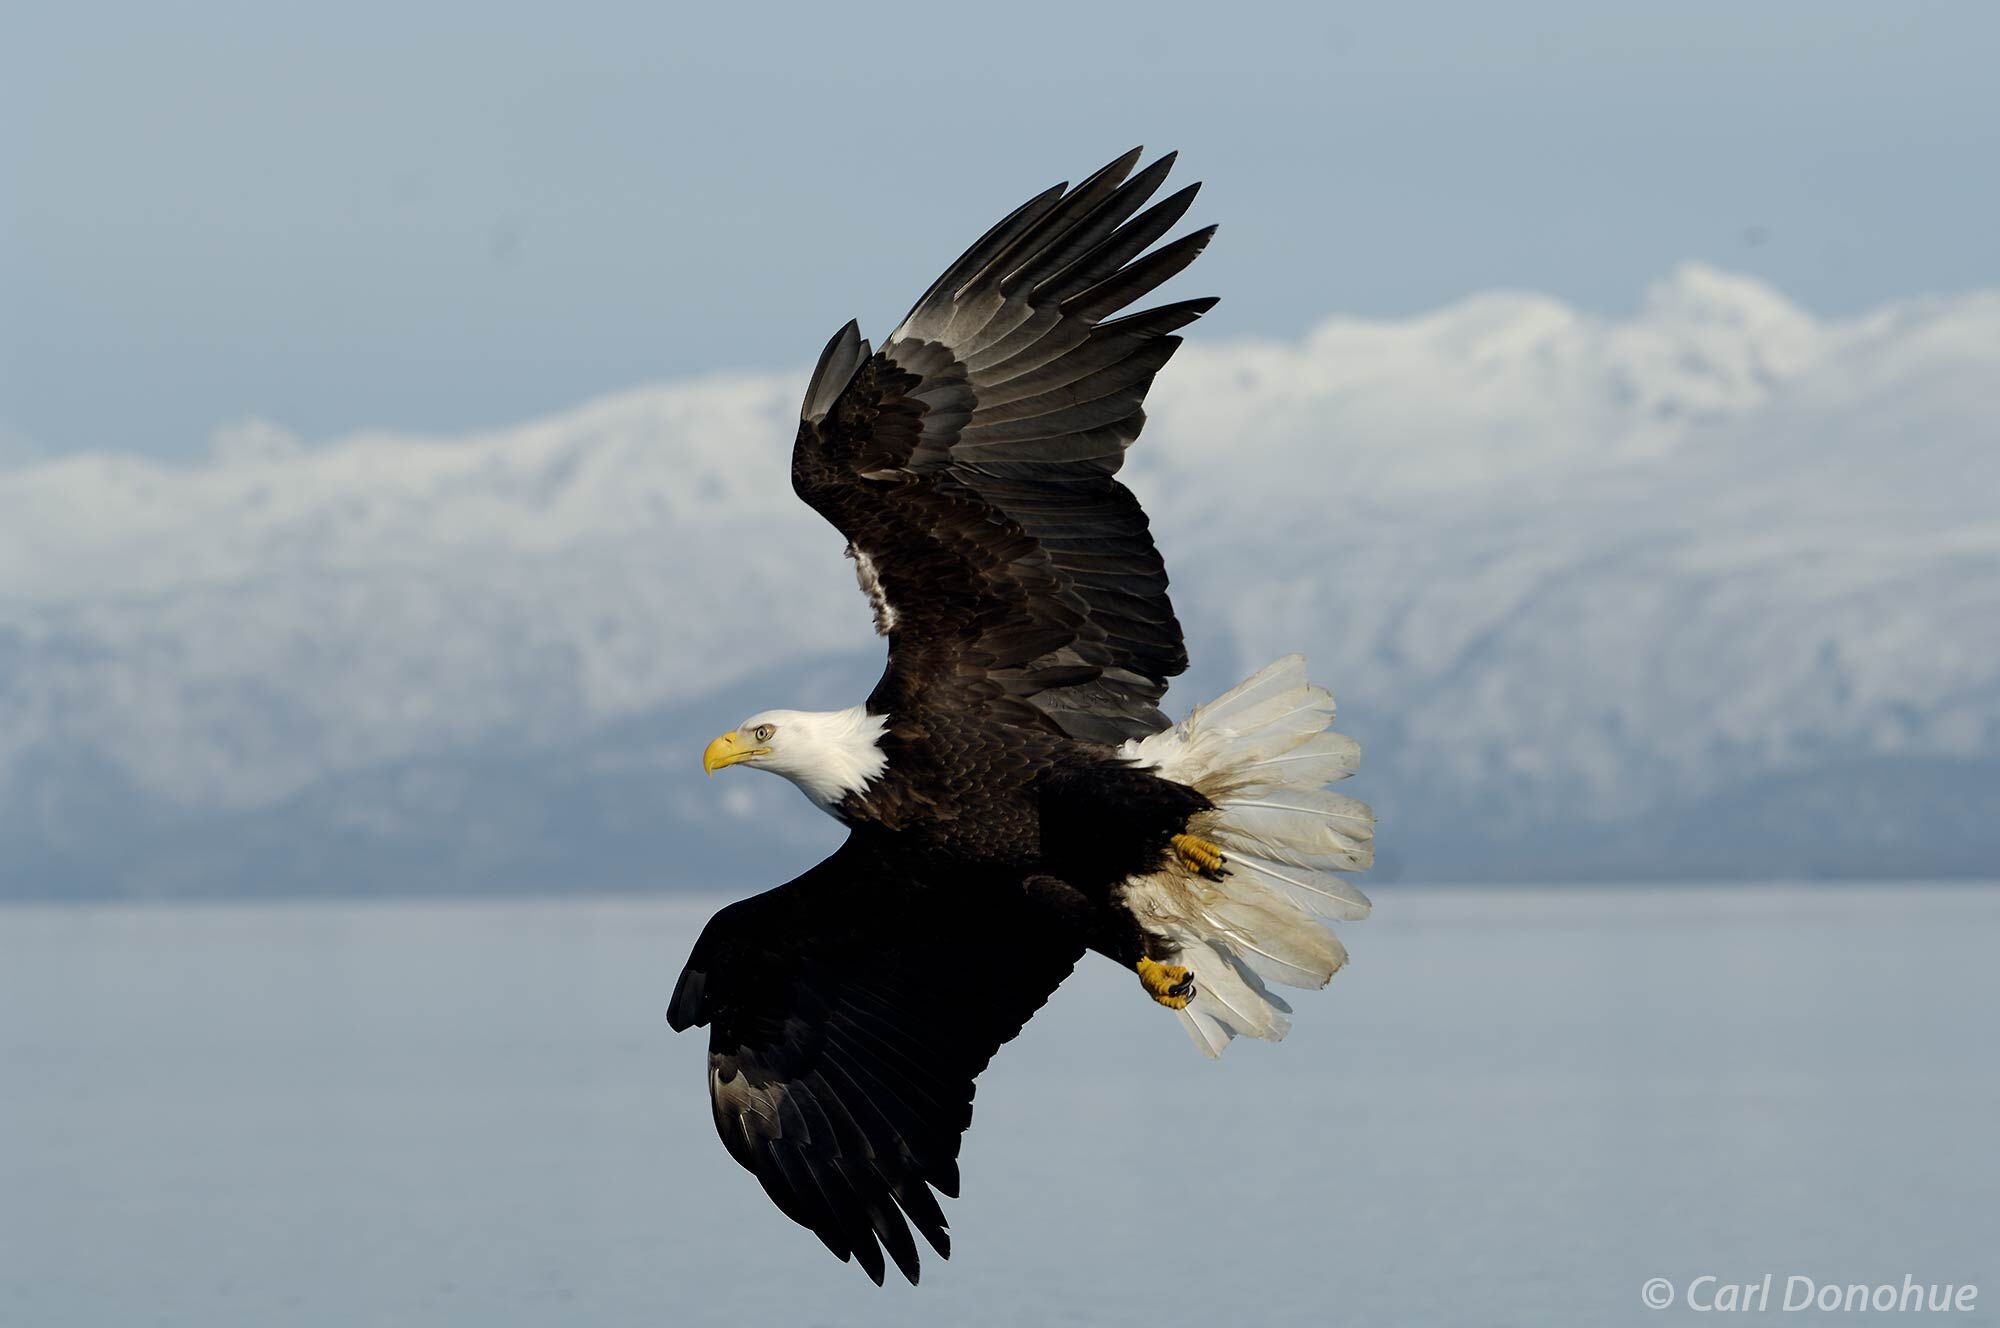 The bald eagle gracefully glides through the air, its powerful wings carrying it towards its next meal: a fish swimming in the...